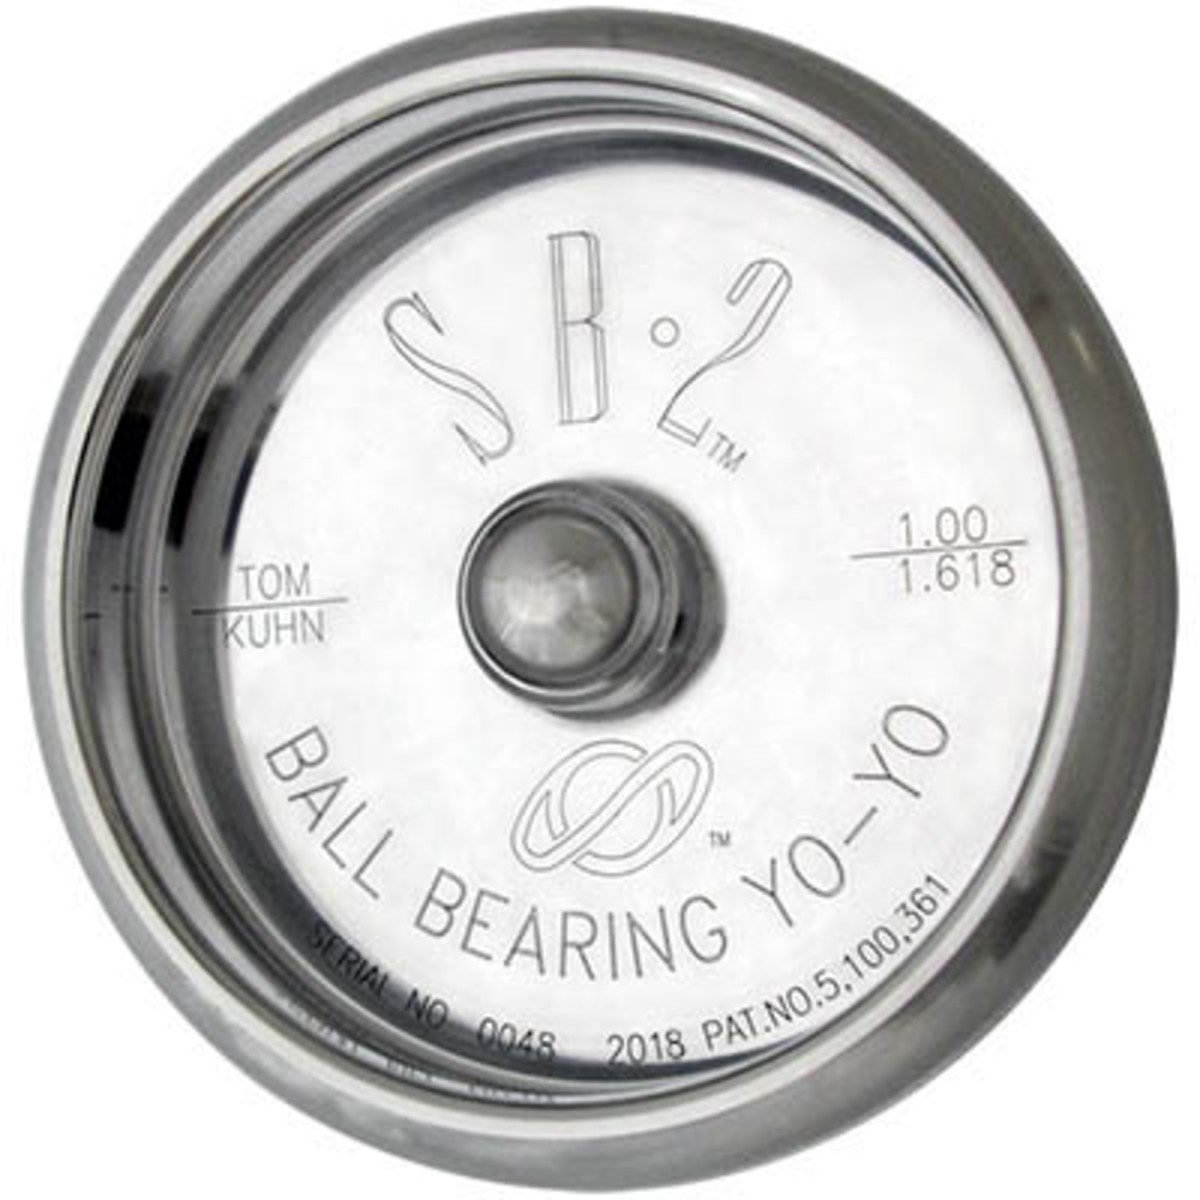 The Tom Kuhn Silver Bullet 2, the first yo-yo in space.